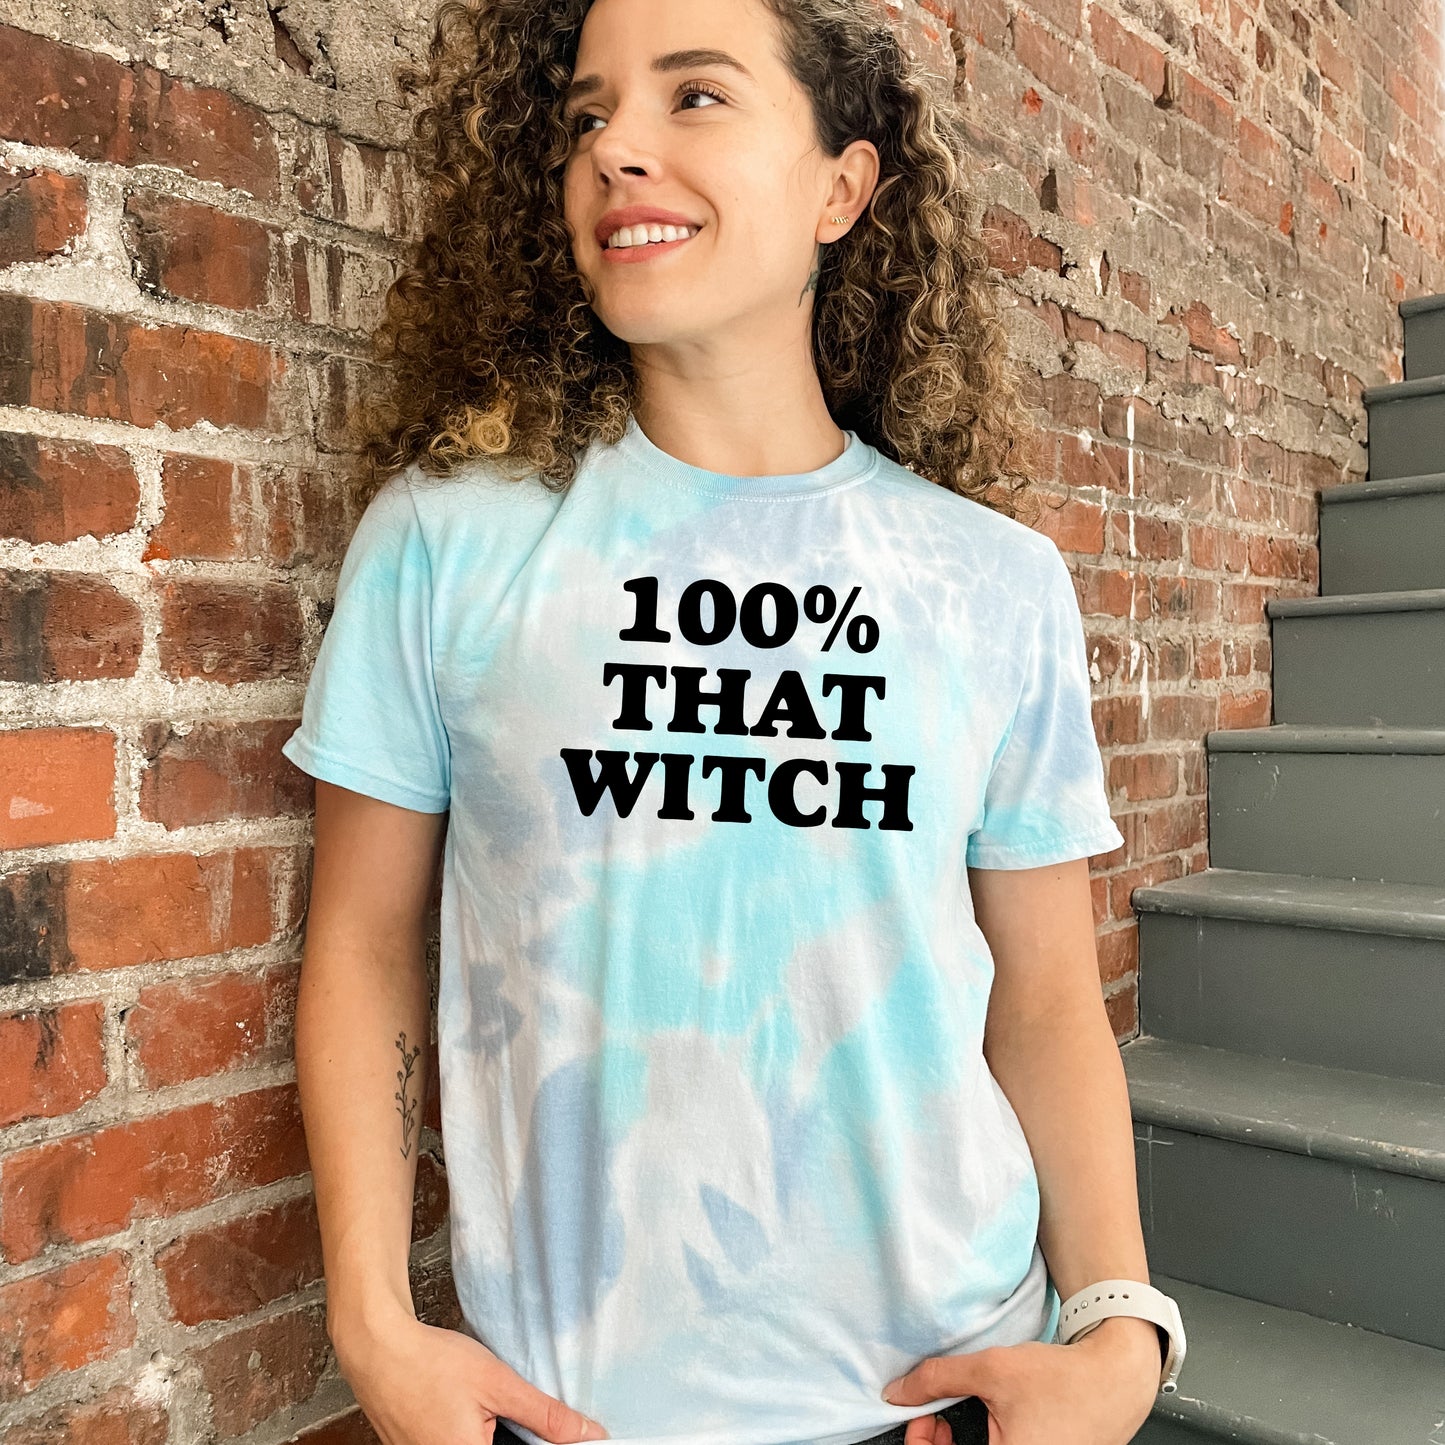 100% That Witch - Mens/Unisex Tie Dye Tee - Blue